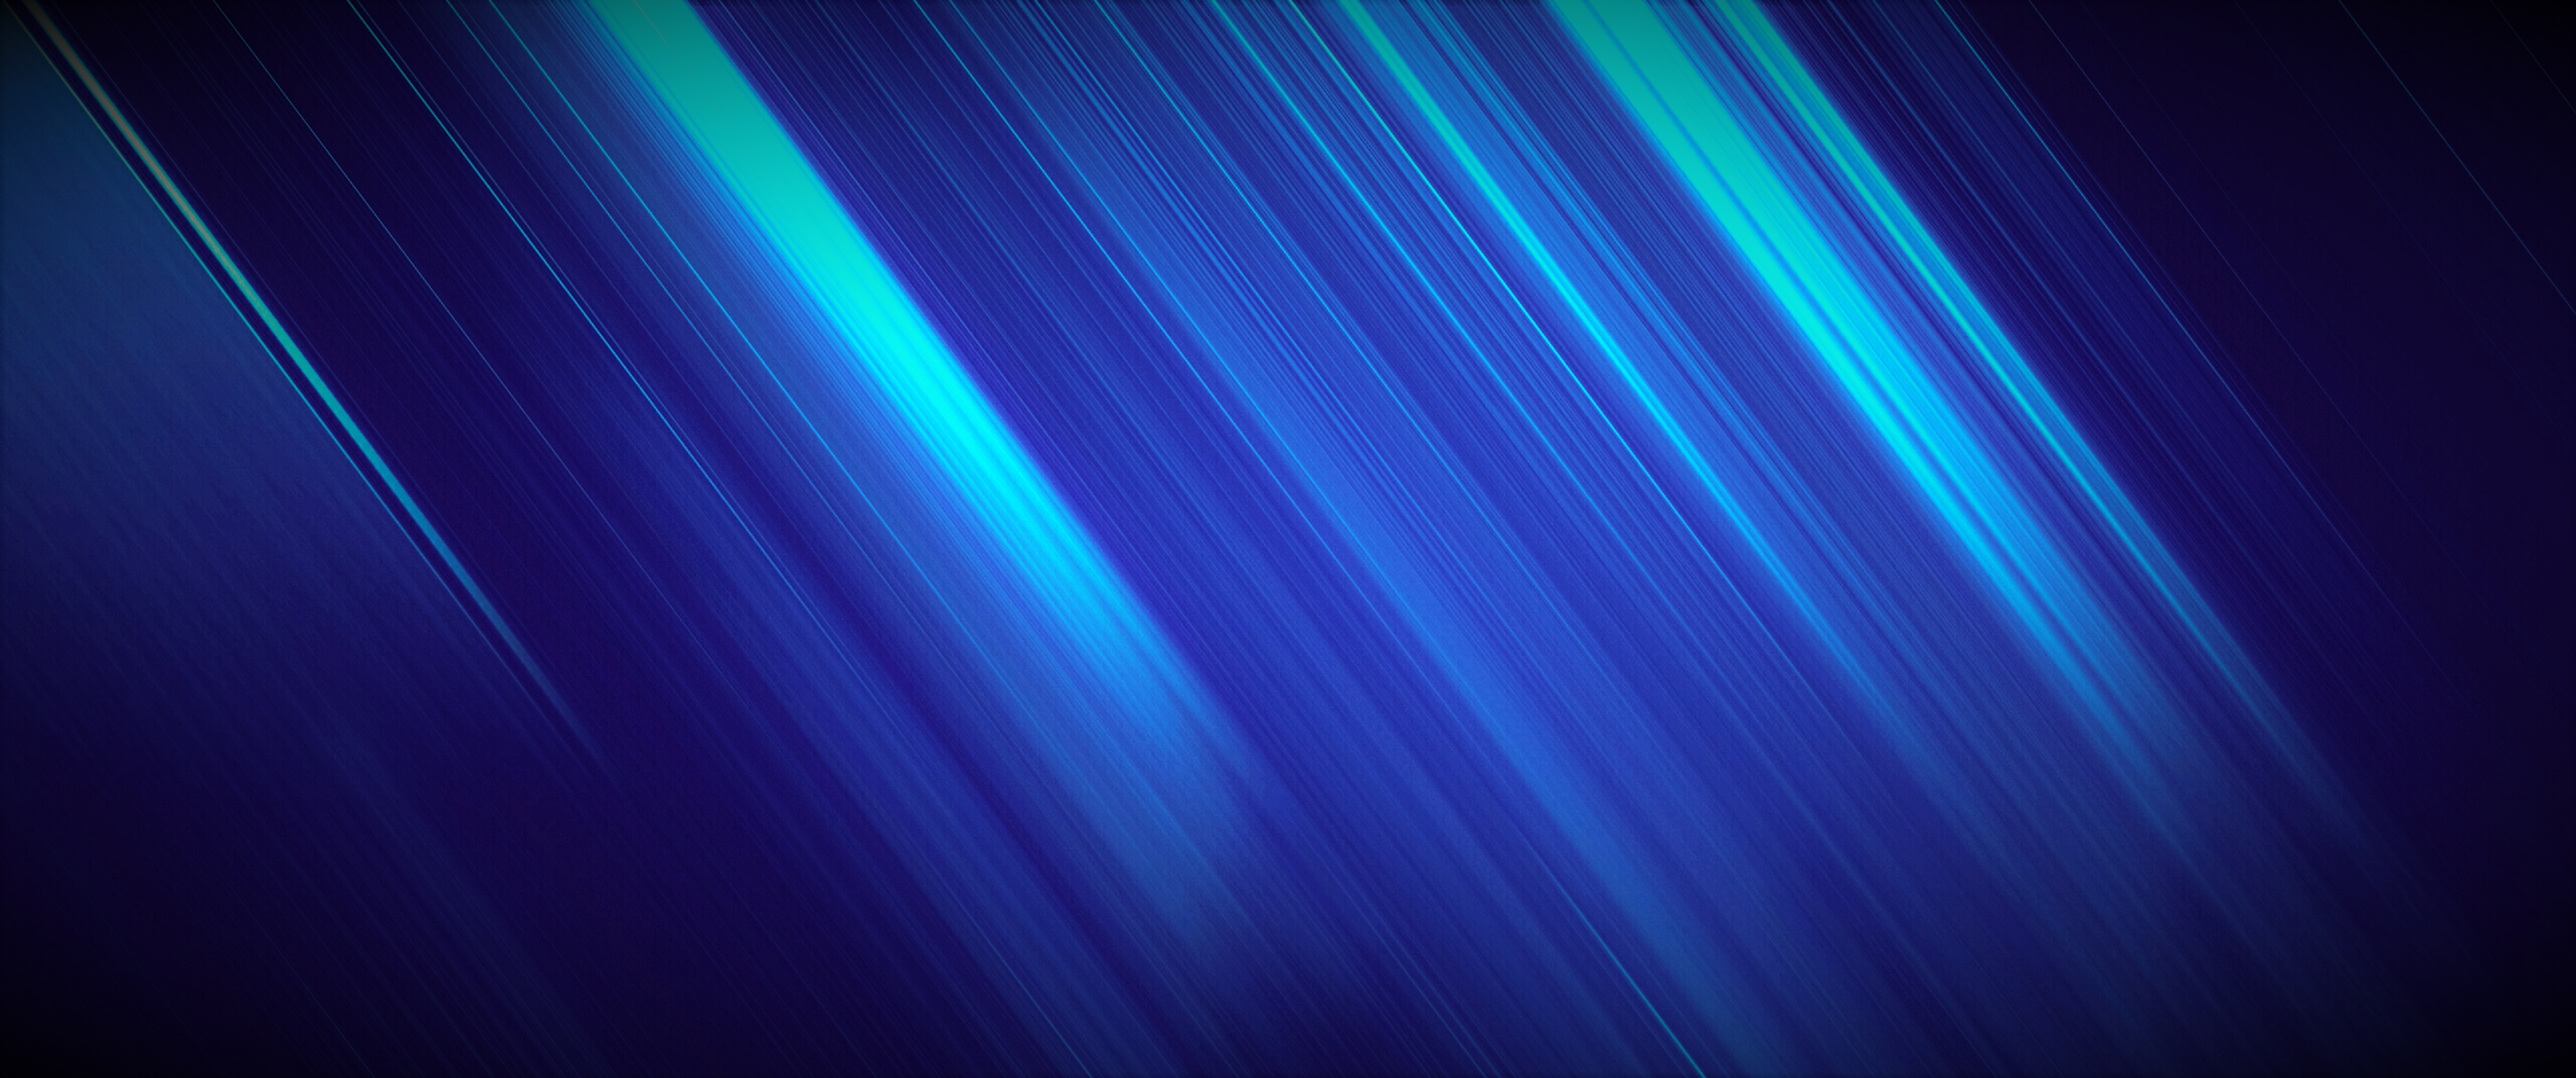 wallpaper 1336x768,blue,green,light,electric blue,turquoise